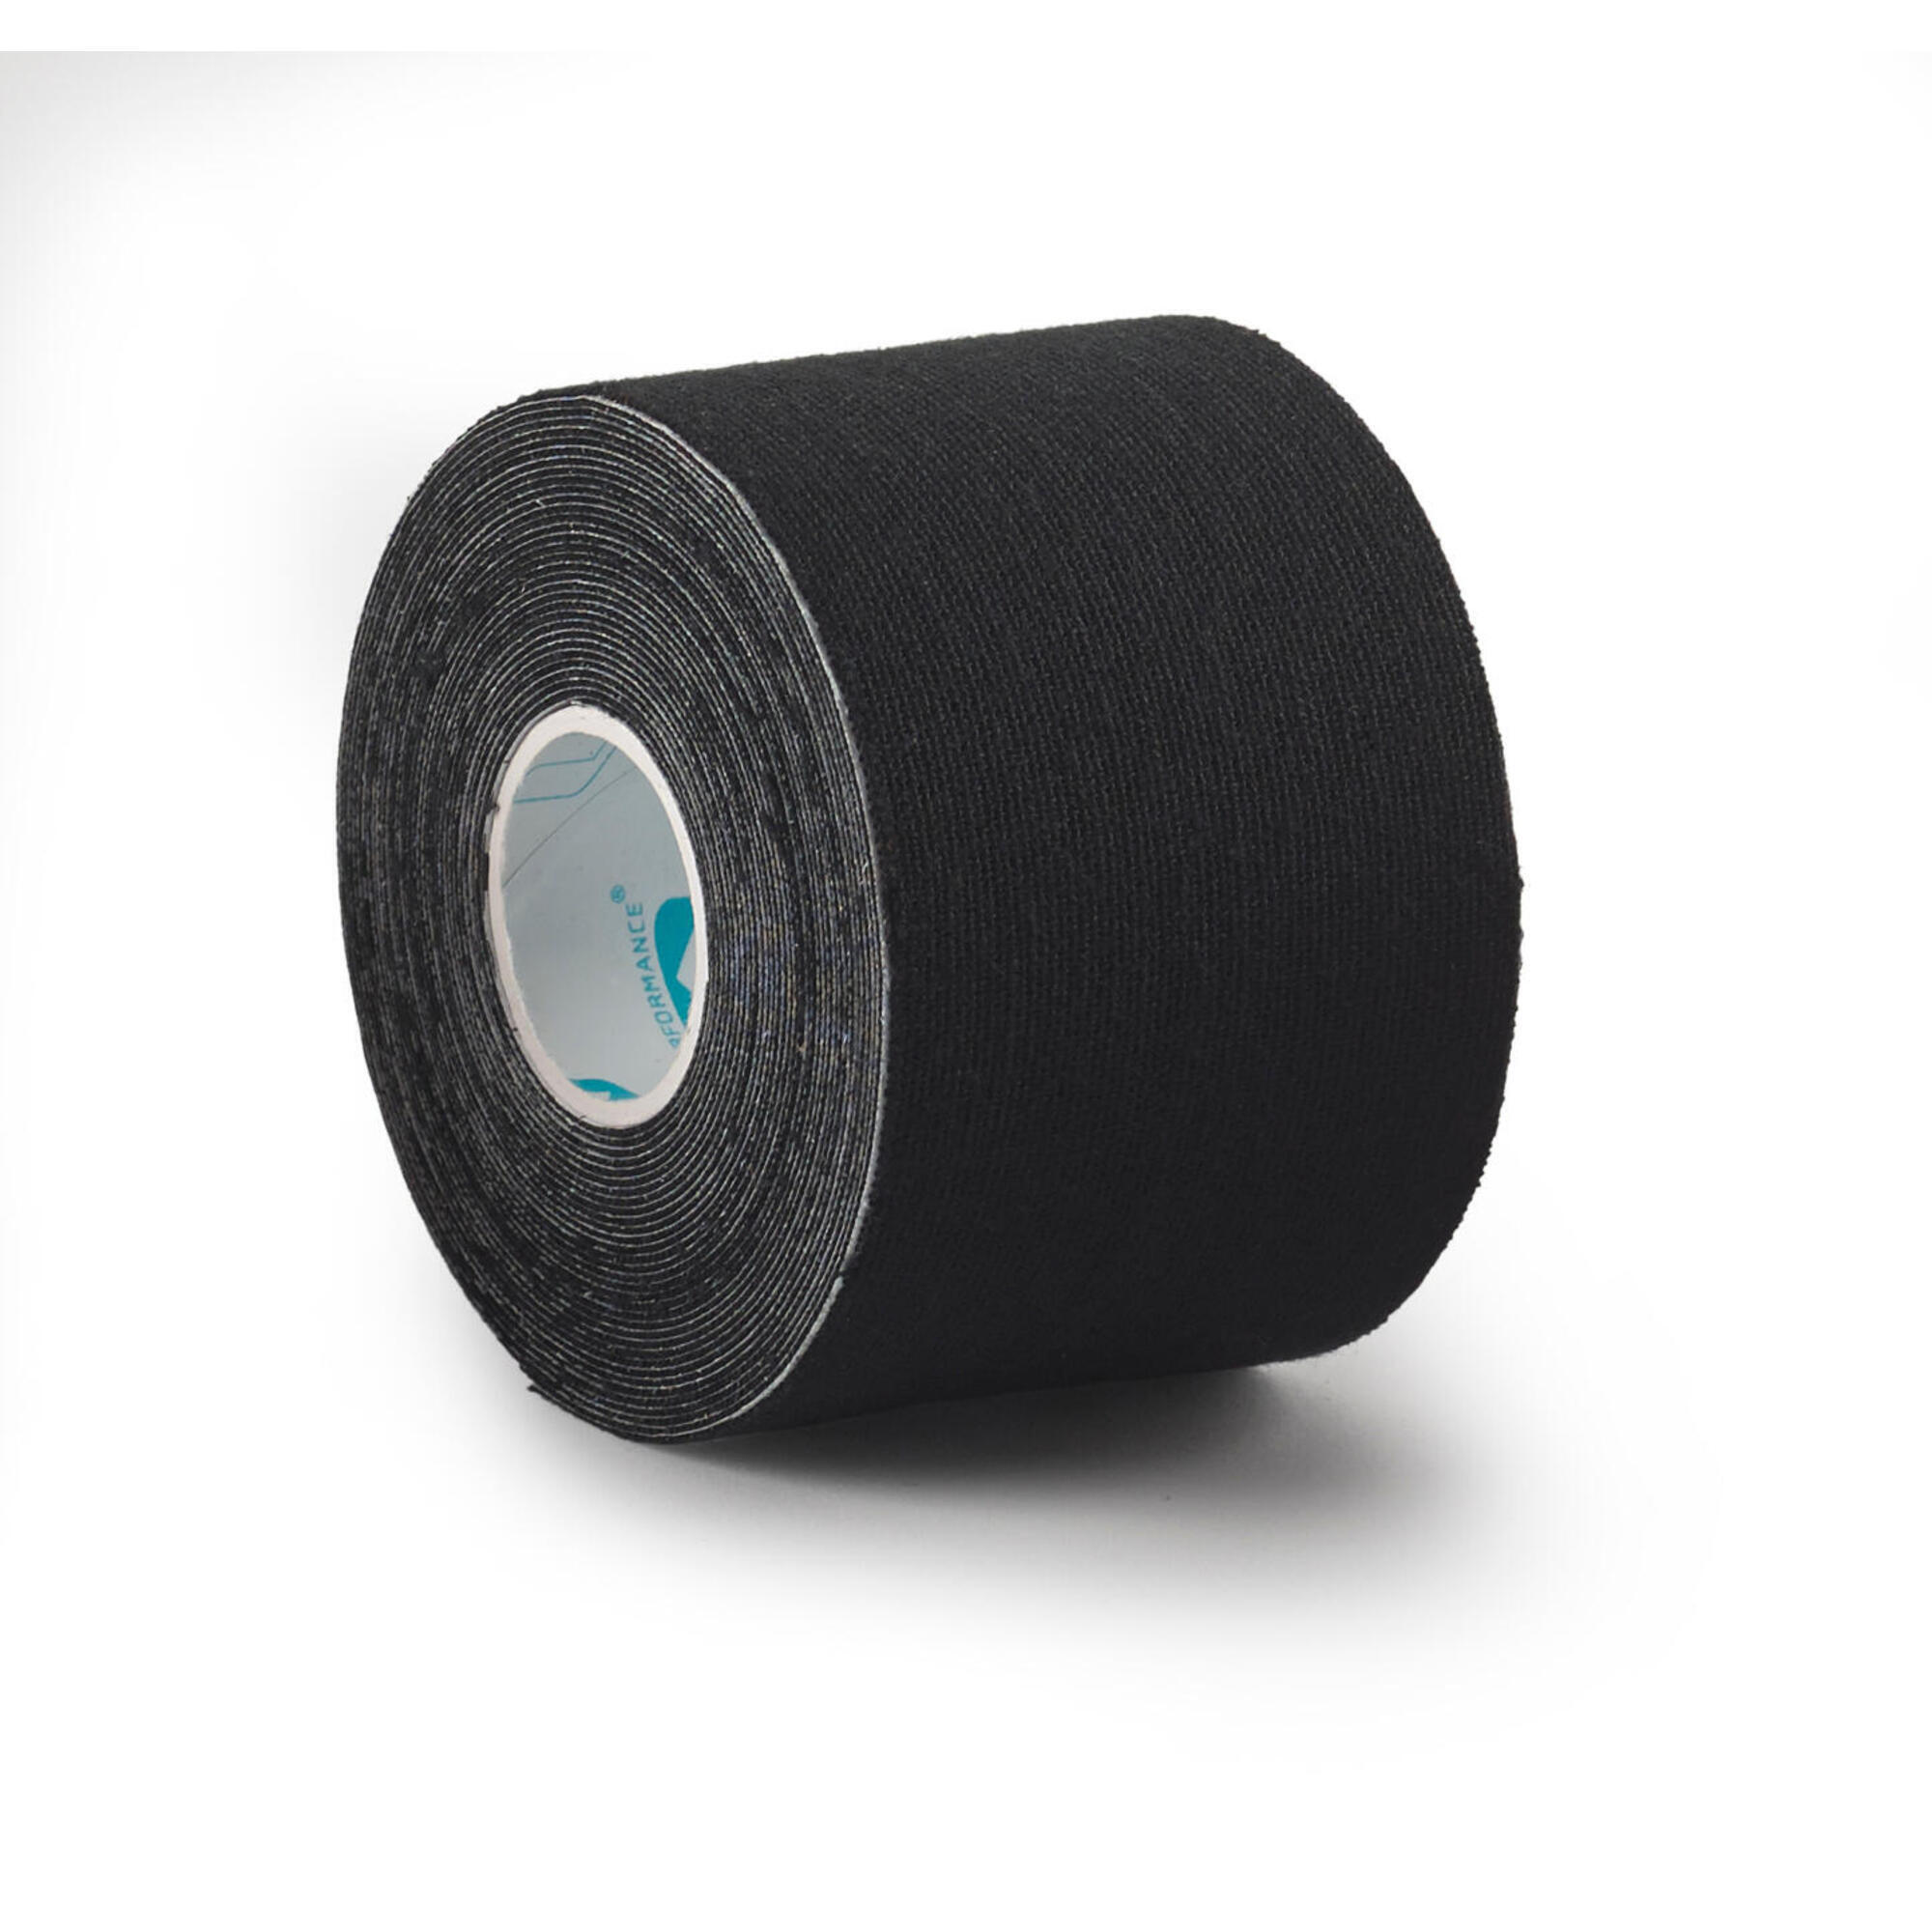 Ultimate Performance UP7001 Kinesiology Tape 5M x 50mm 1/1